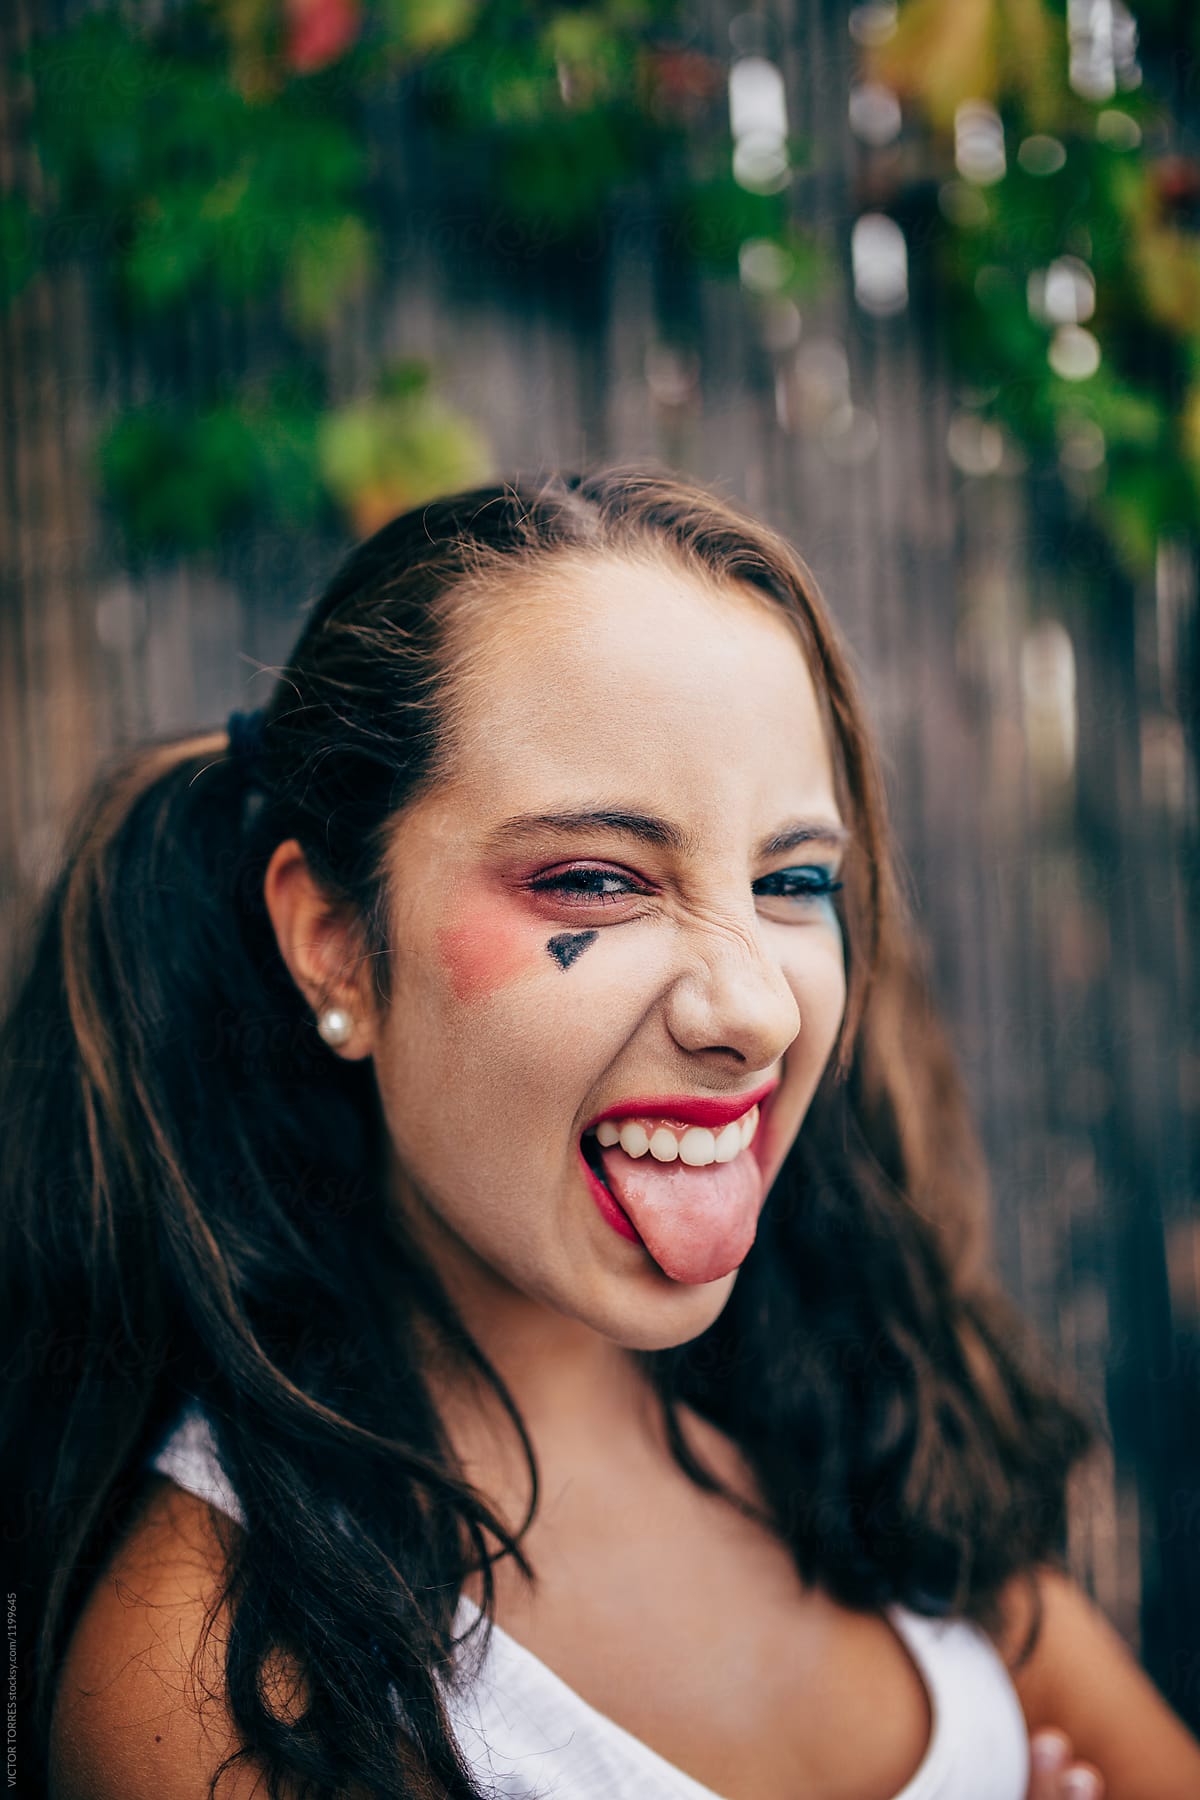 Teenager Girl With Punk Makeup Sticking Out Tongue By Stocksy Contributor Victor Torres 